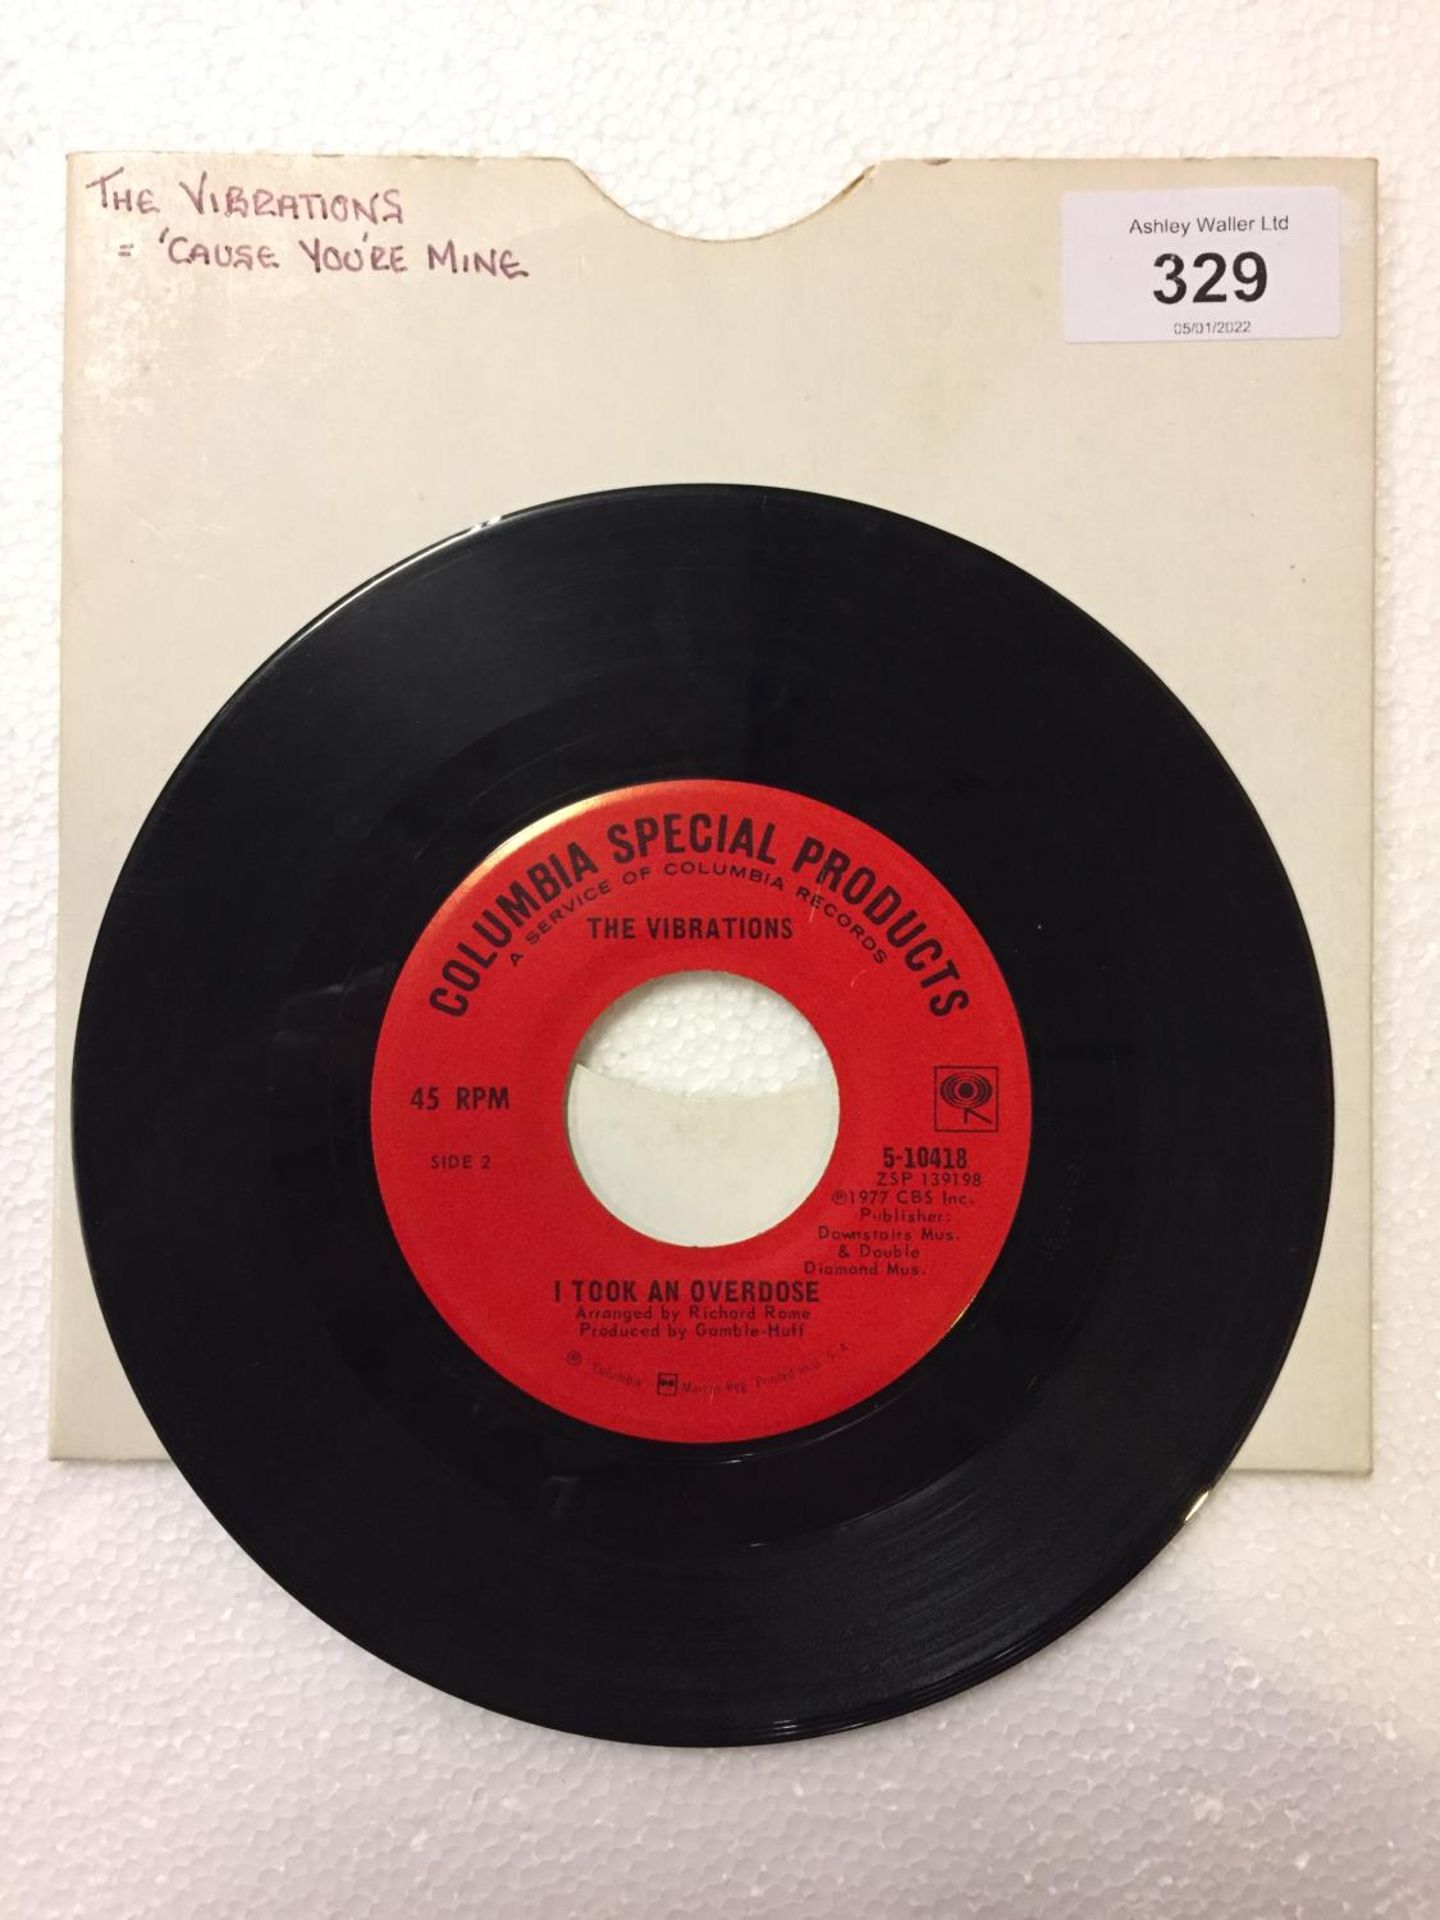 A US 1977 RELEASE 7 INCH VINYL FUNK / SOUL RECORD 'CAUSE YOU'RE MINE' BY THE VIBRATIONS. LABEL: - Image 2 of 2